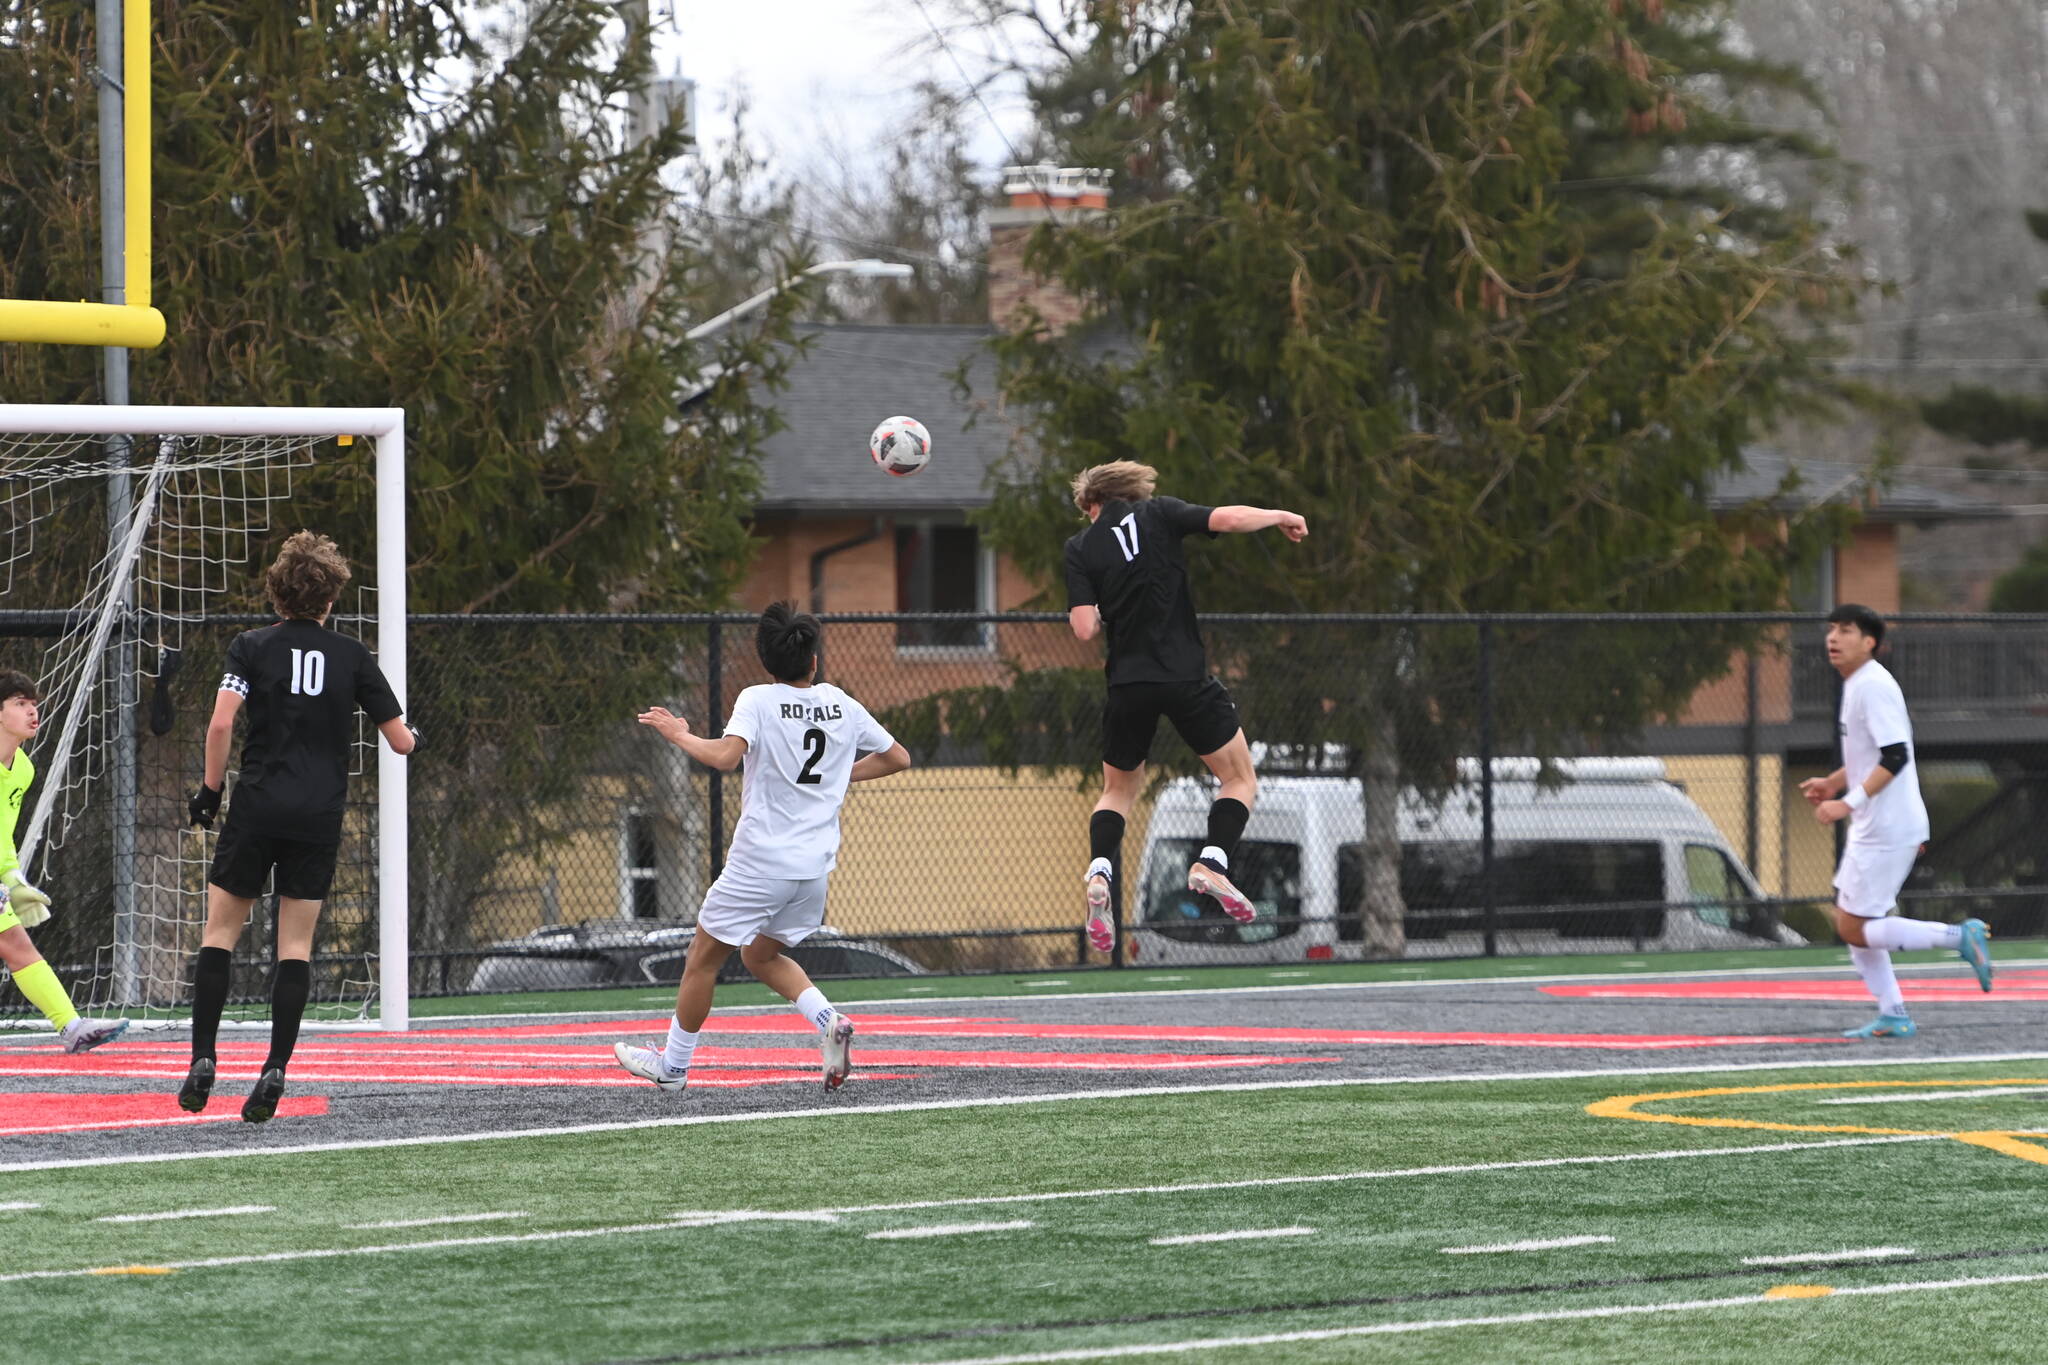 Zach Ellis scores Mount Si’s first goal in a 2-0 win against Lynnwood on March 25. The Wildcats are now 1-3 on the season. Photo Courtesy of Calder Productions.